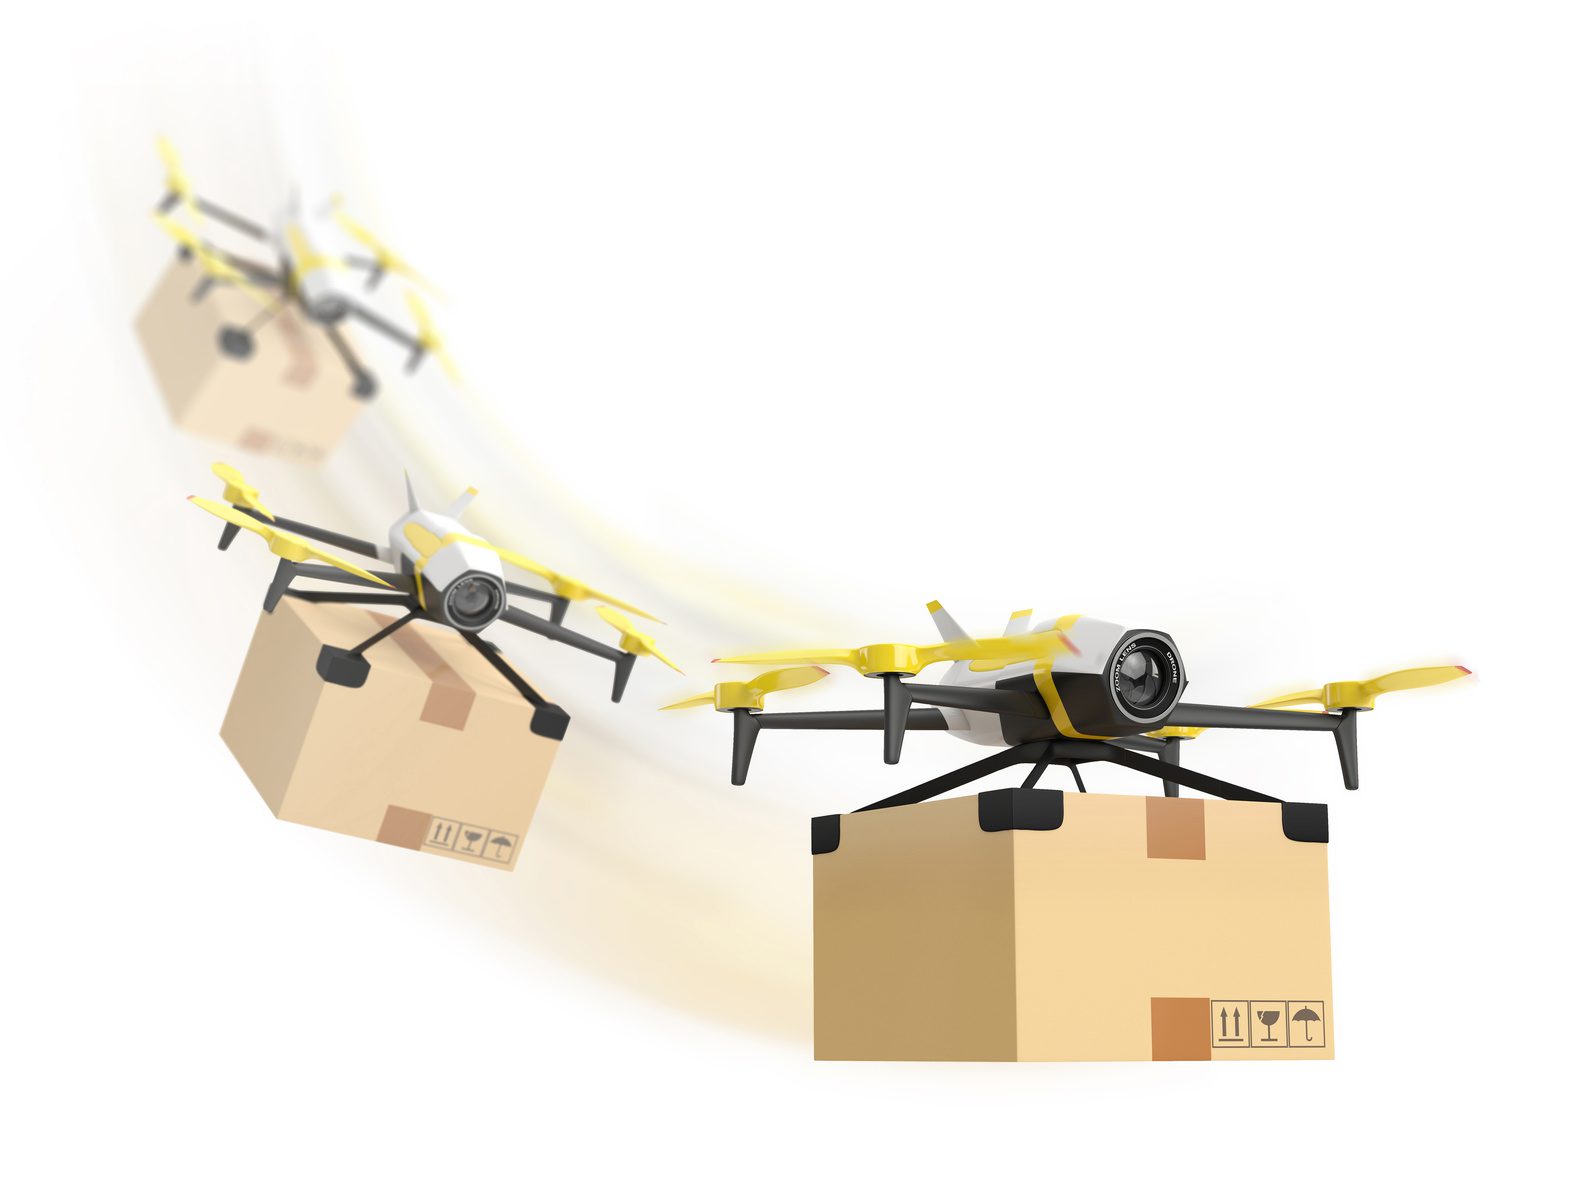 Commercial Drones Poised to Be the Next Disruptive Technology?